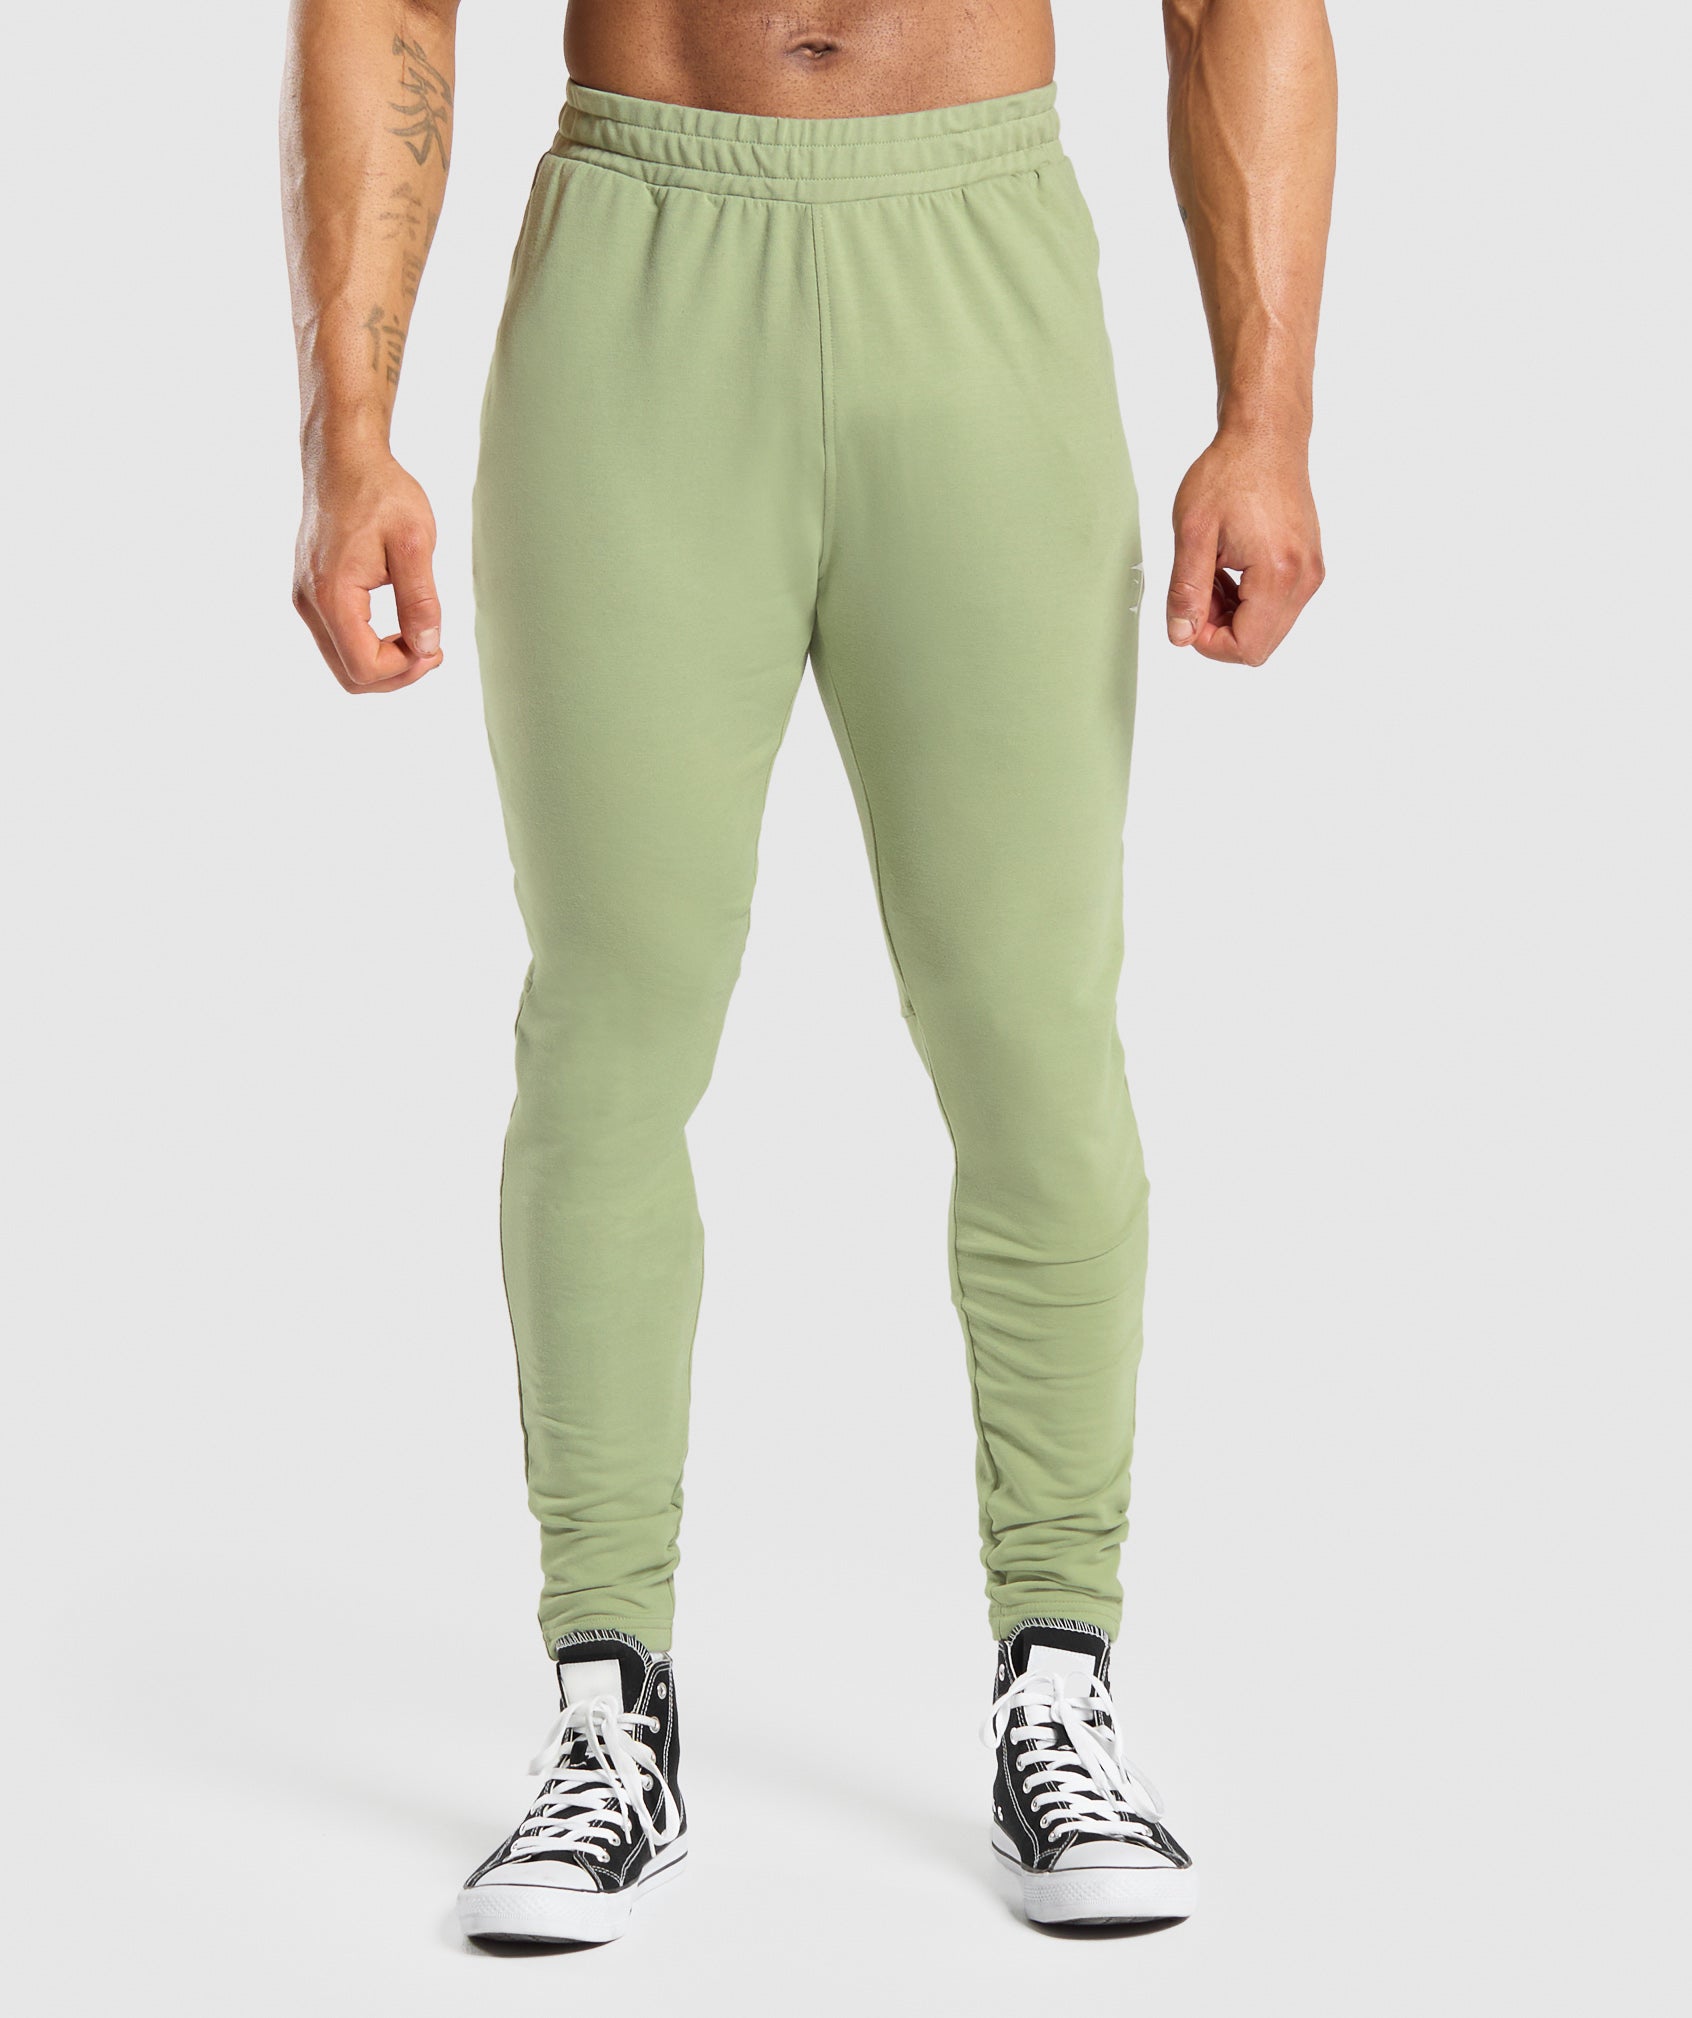 Essential Muscle Joggers in Natural Sage Green - view 1